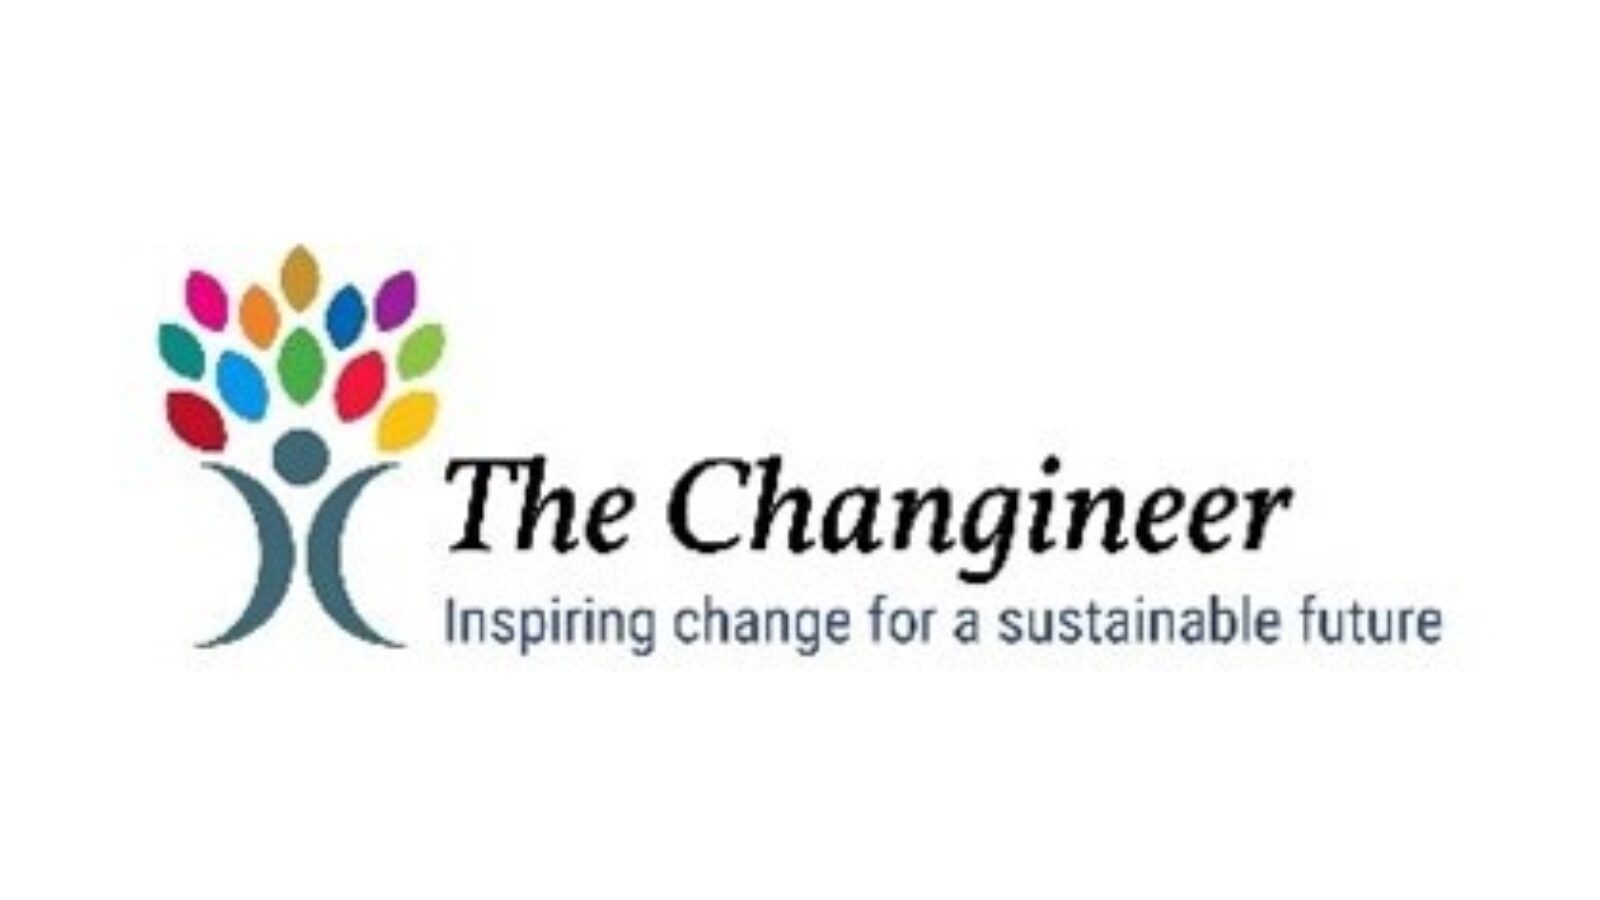 The Changineer to host sustainability event